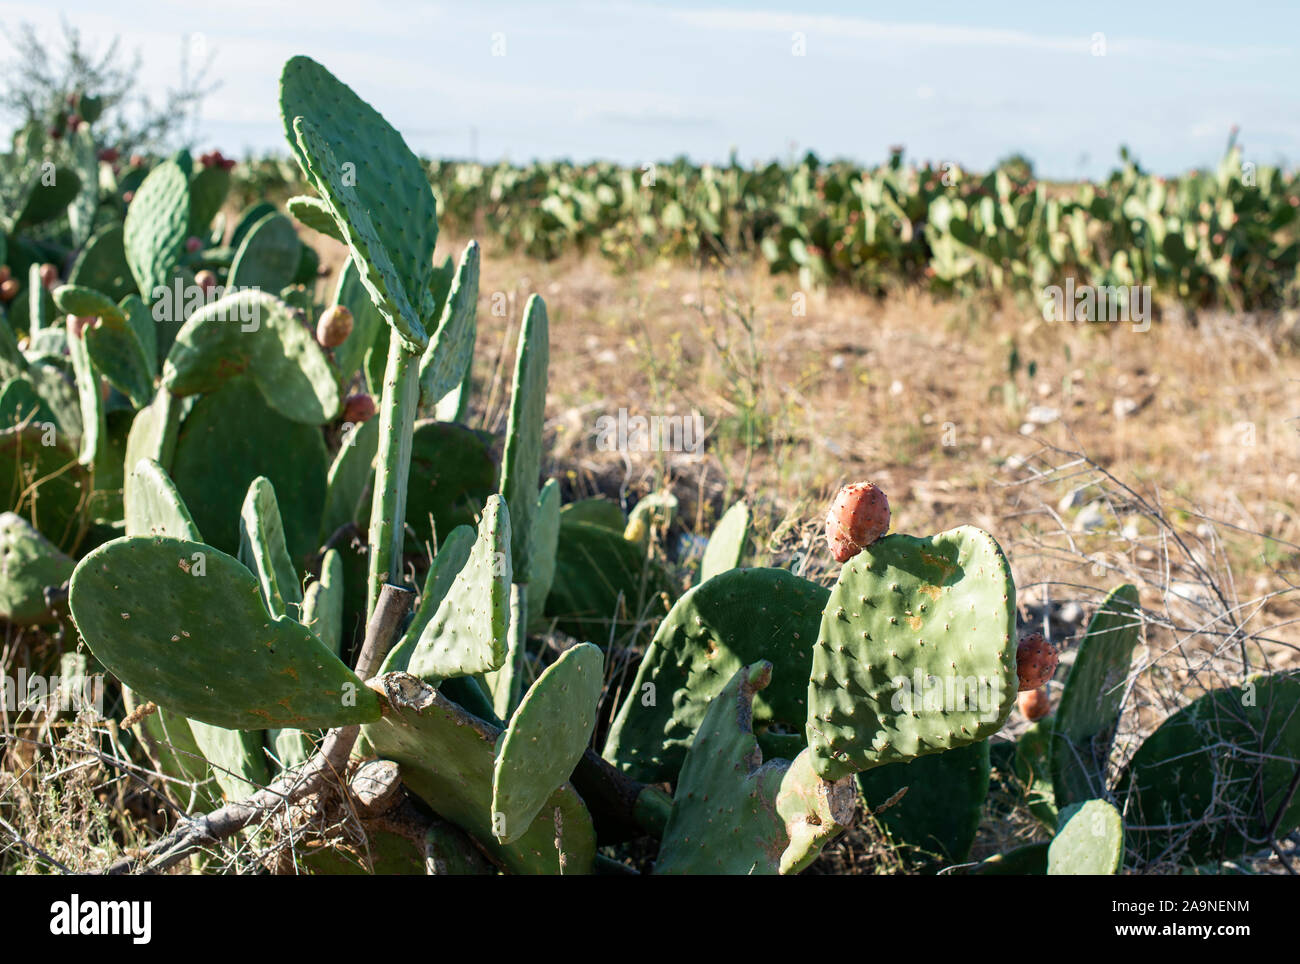 Industrial cactus plantation. Growing cactus. Fruits on cactus. Sunny day. Stock Photo